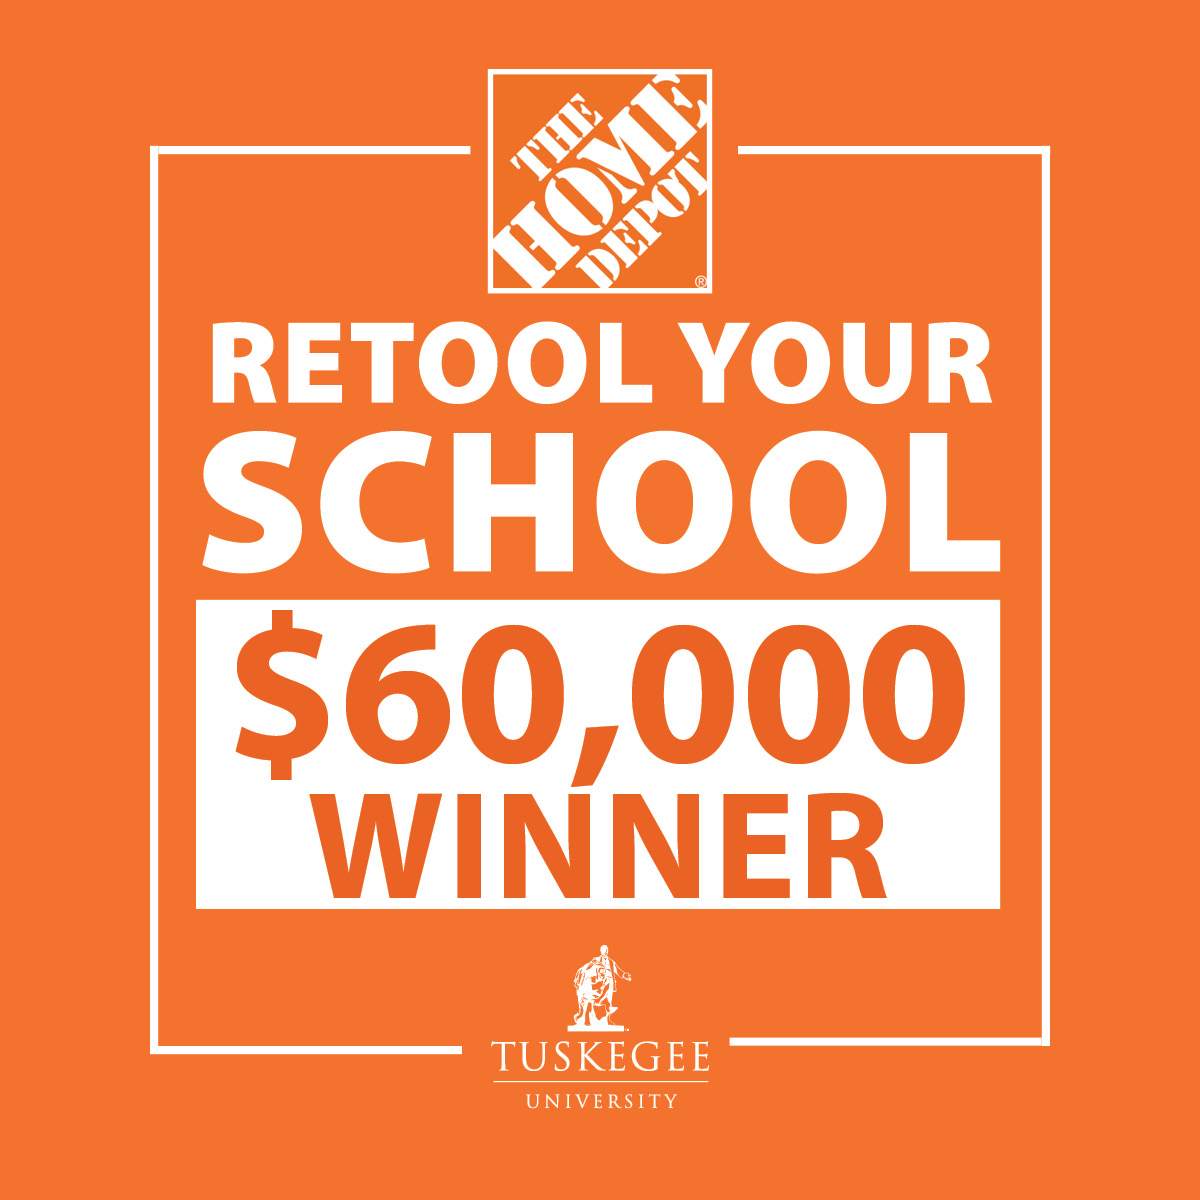 Tuskegee University has won a $60,000 campus improvement grant in the 2024 Home Depot Retool Your School contest. With this latest win, Tuskegee University also received what is called the Record Smasher Award, having the most wins. Read More at: tuskegee.edu/news/tuskegee-….